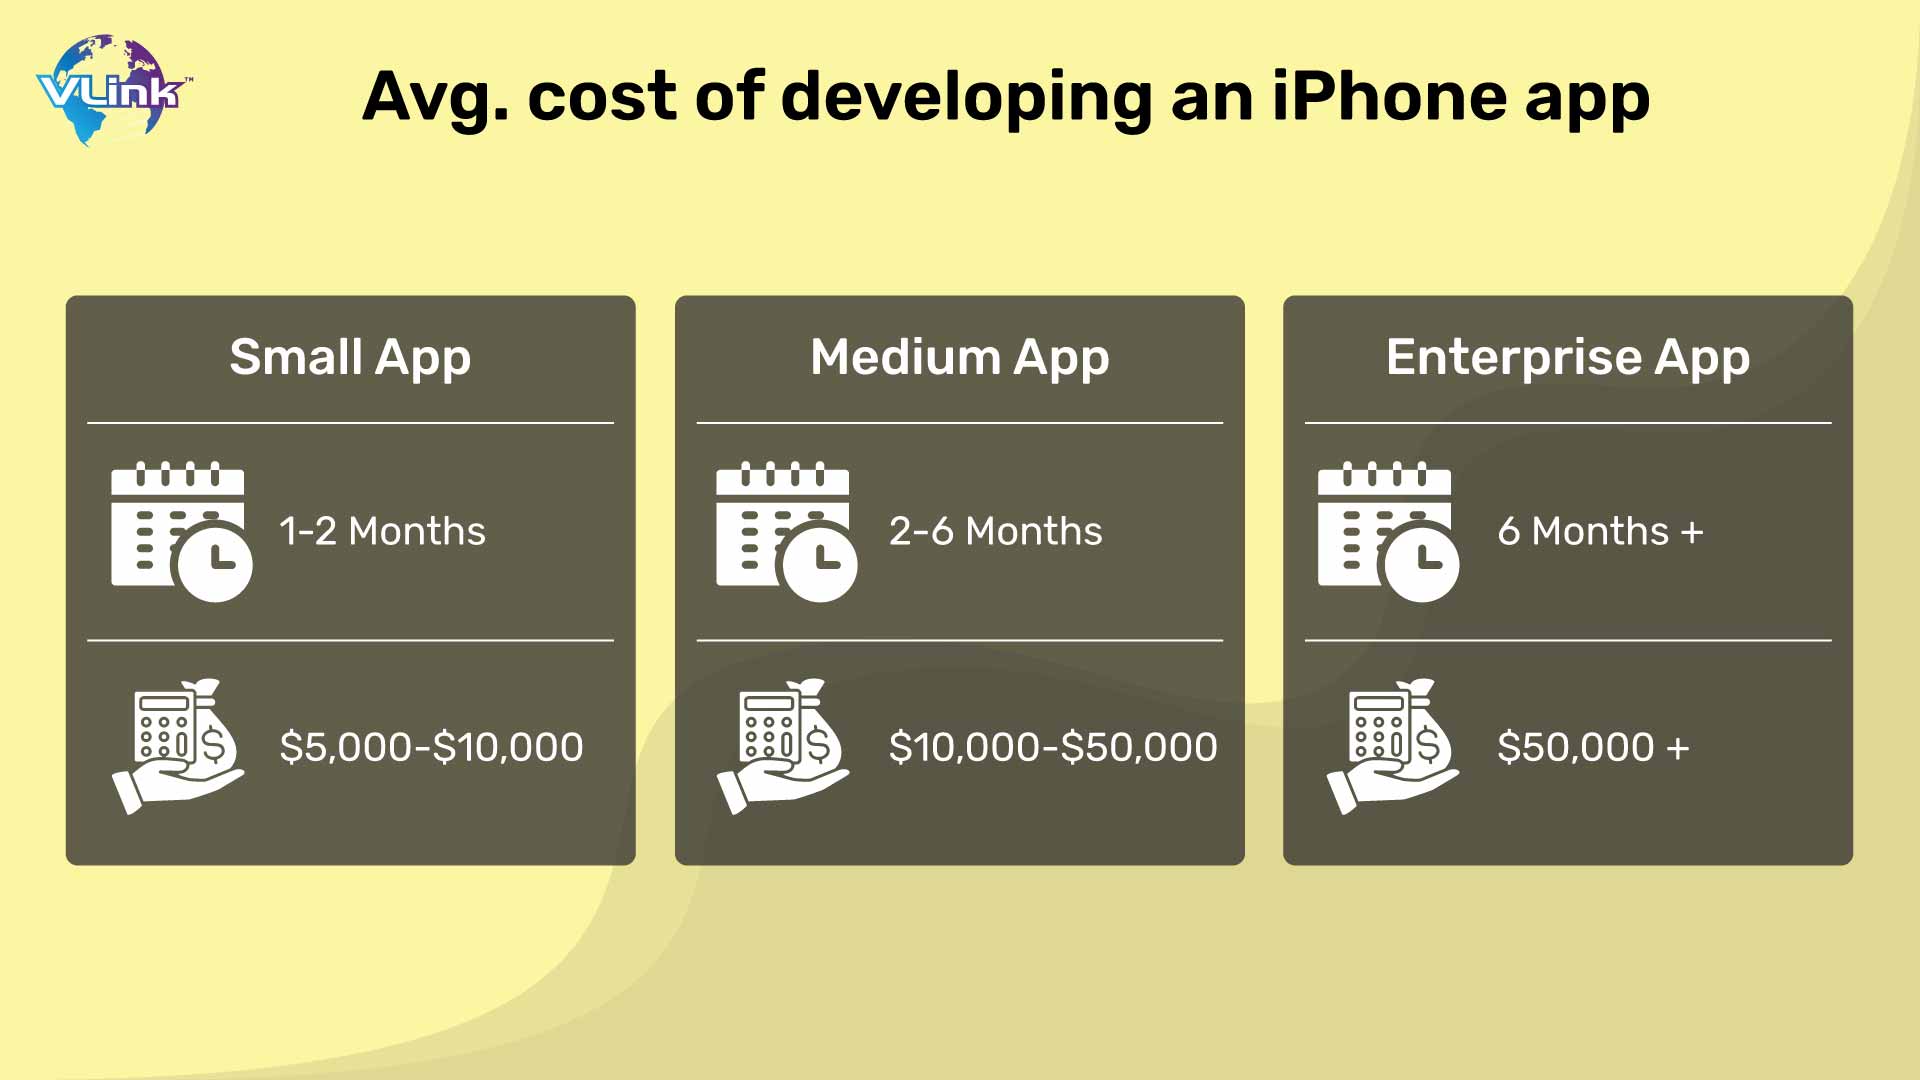 Avg. cost of developing an iPhone app